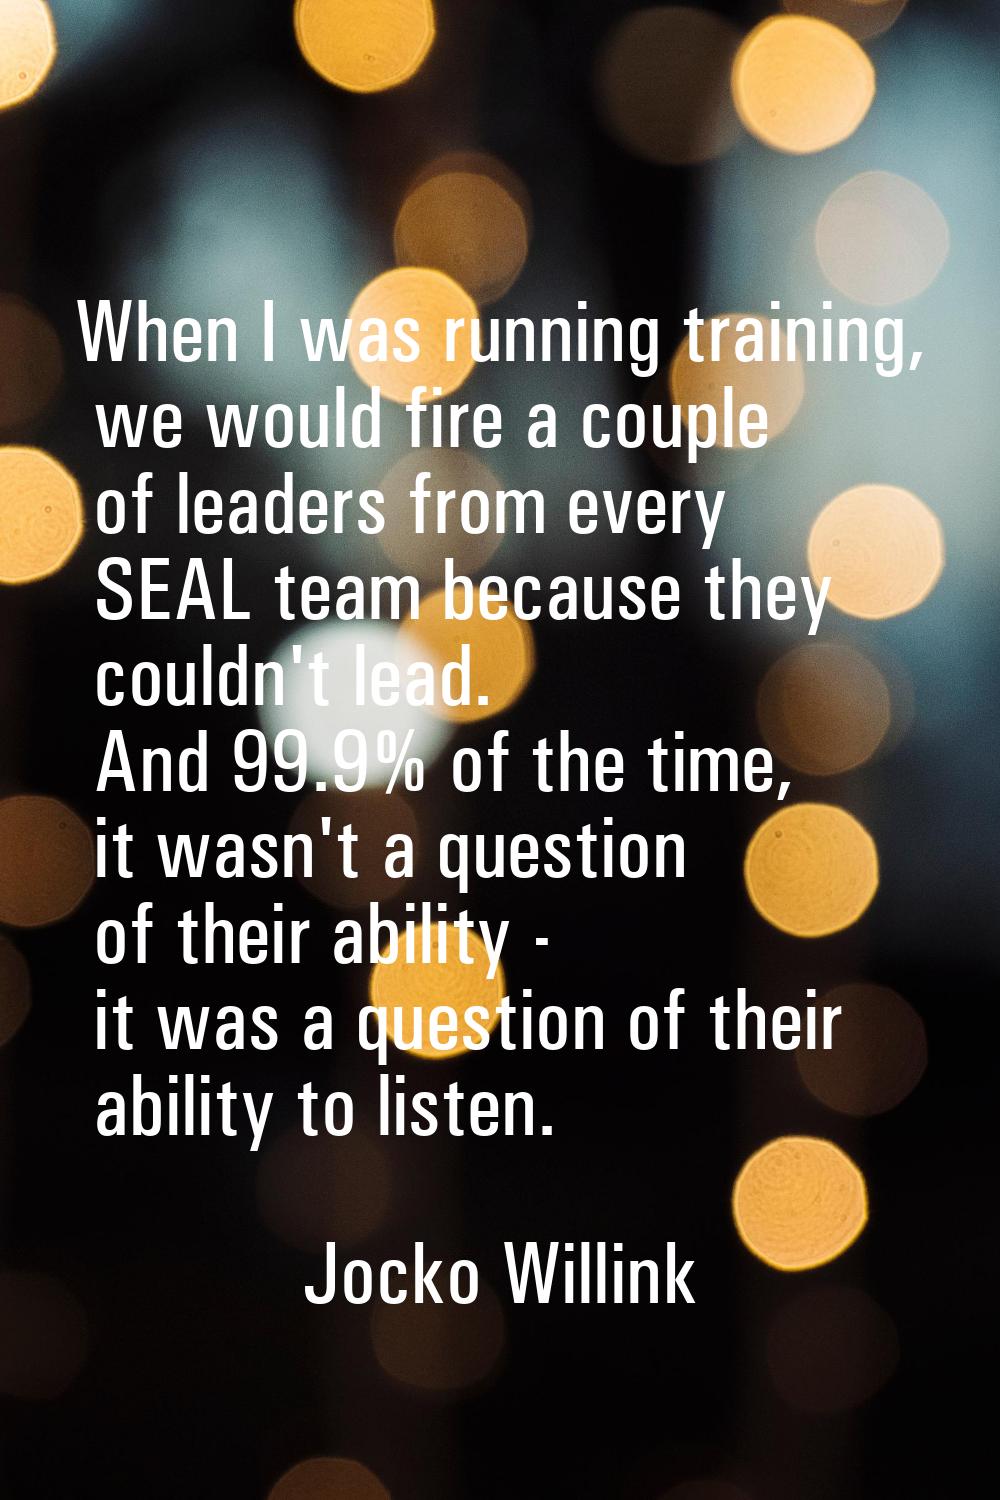 When I was running training, we would fire a couple of leaders from every SEAL team because they co